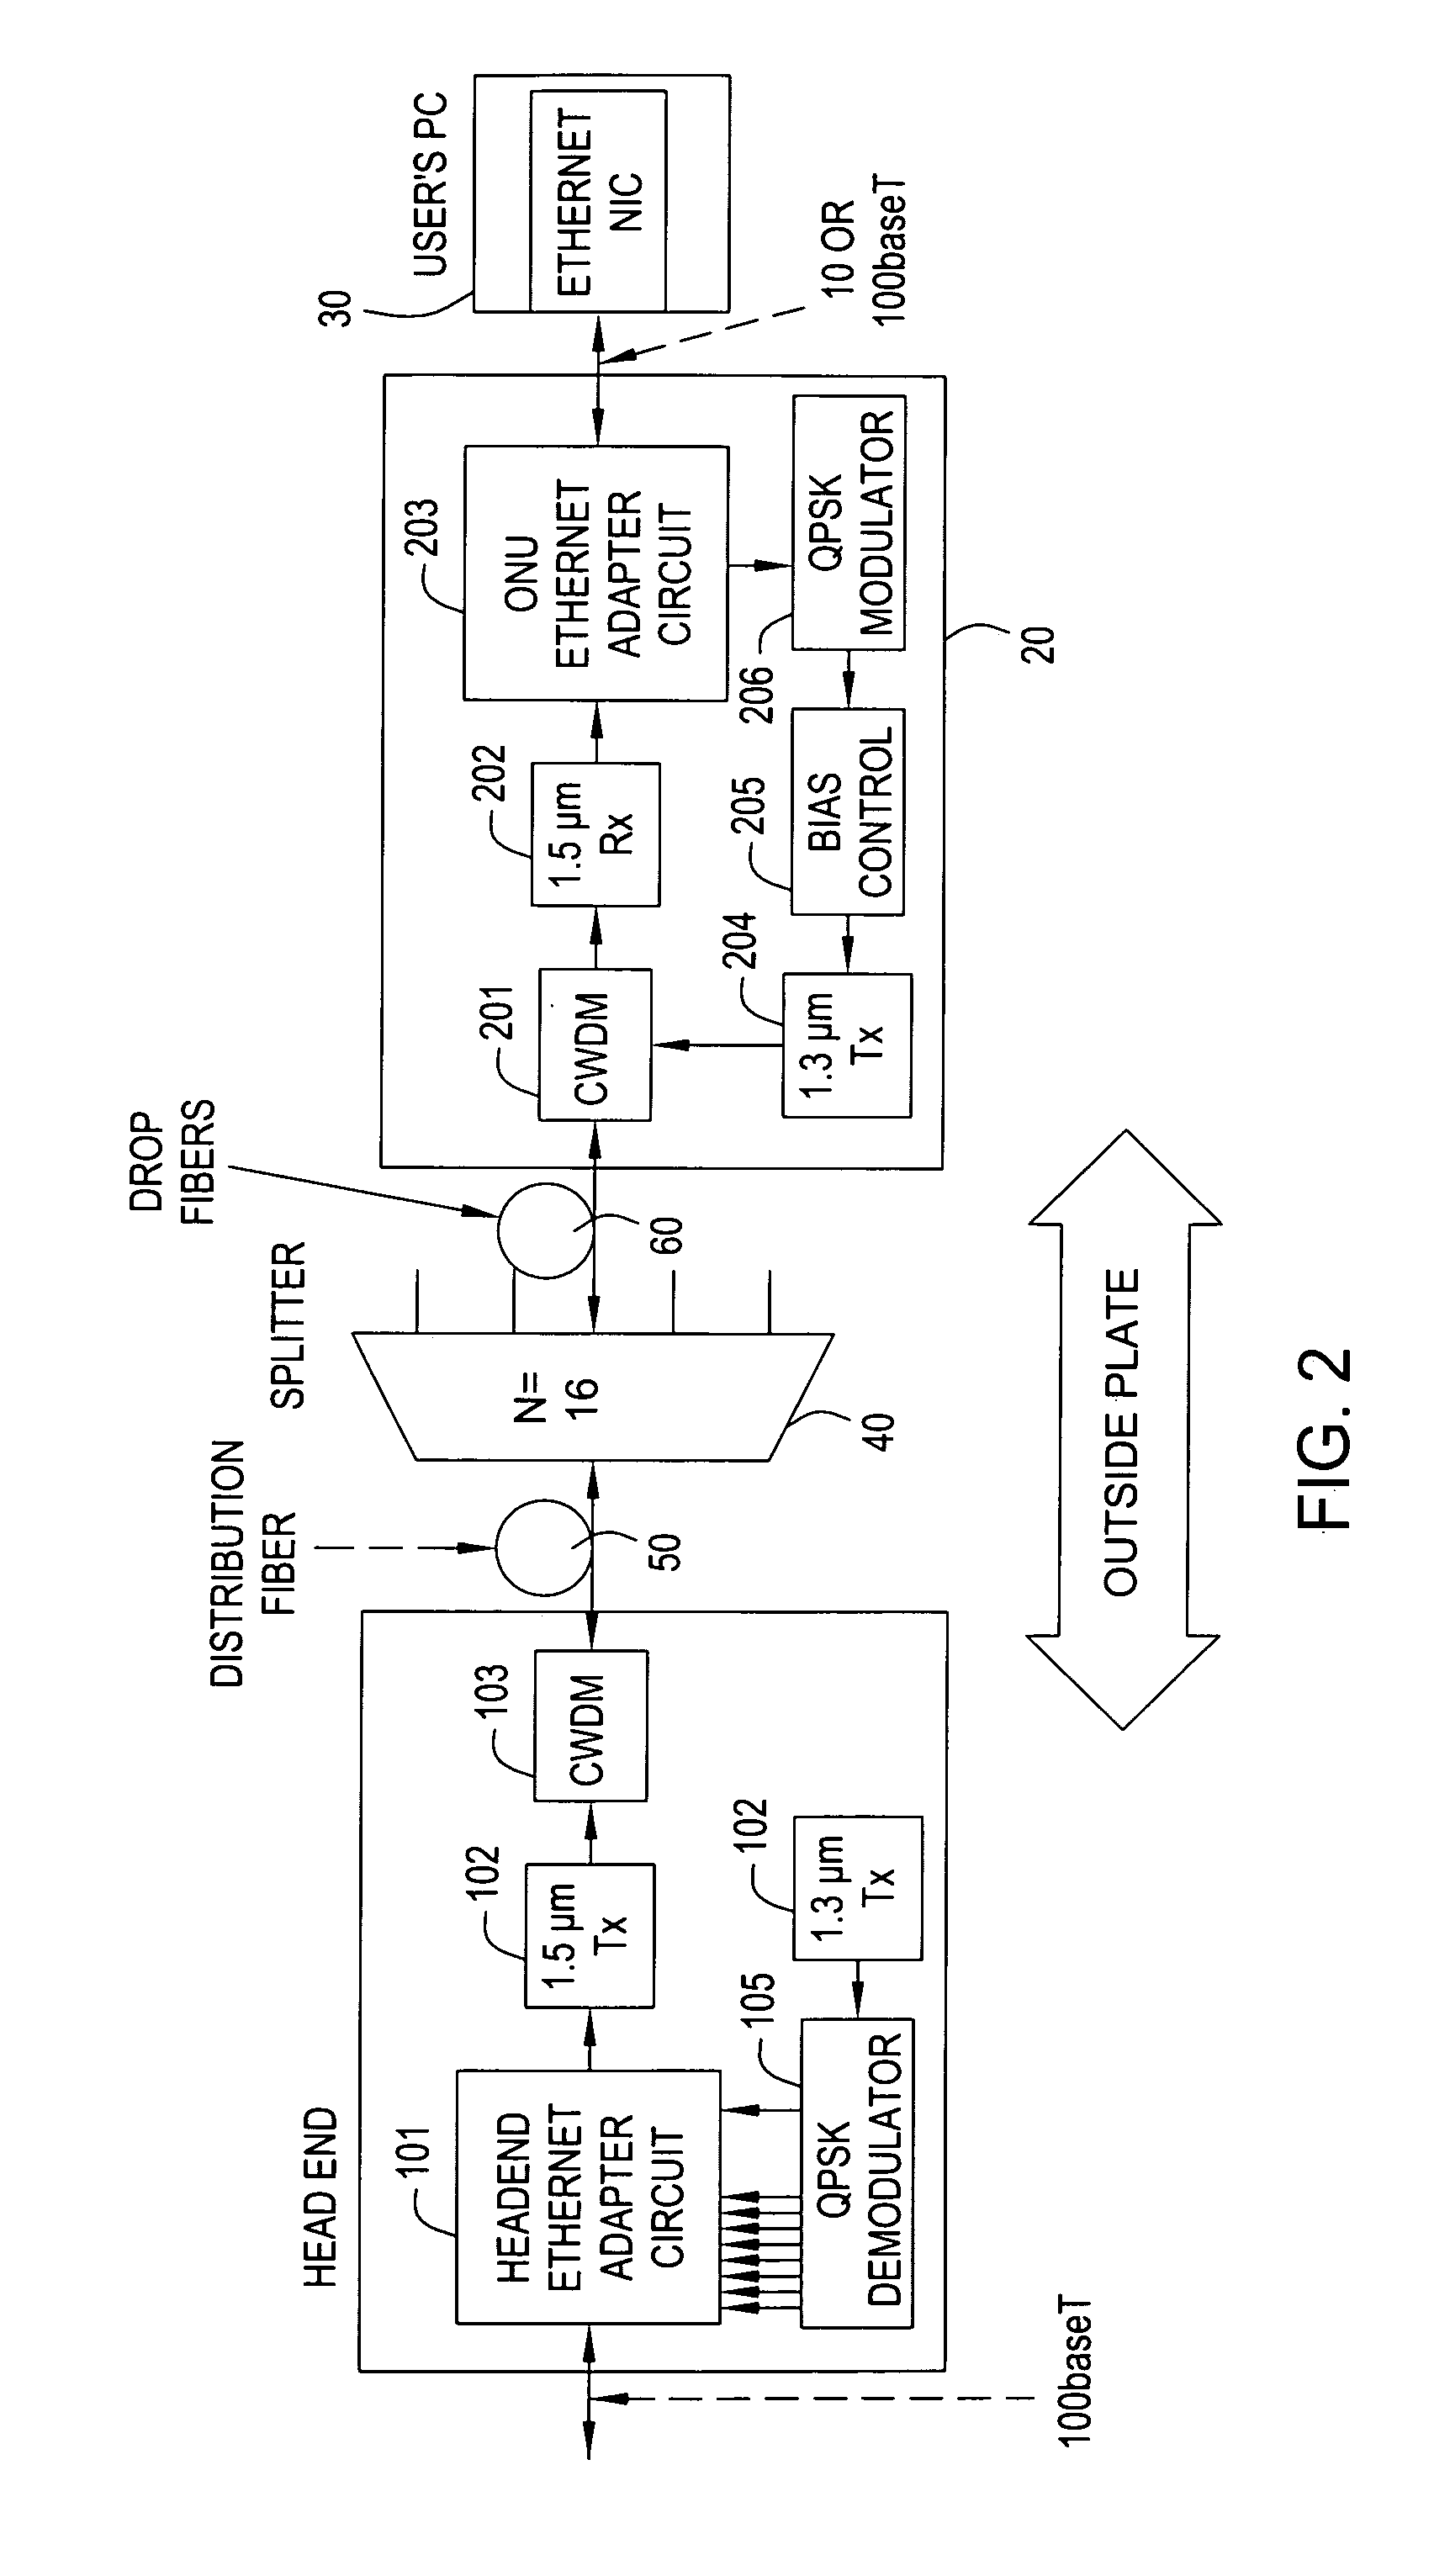 System for operating an Ethernet data network over a passive optical network access system